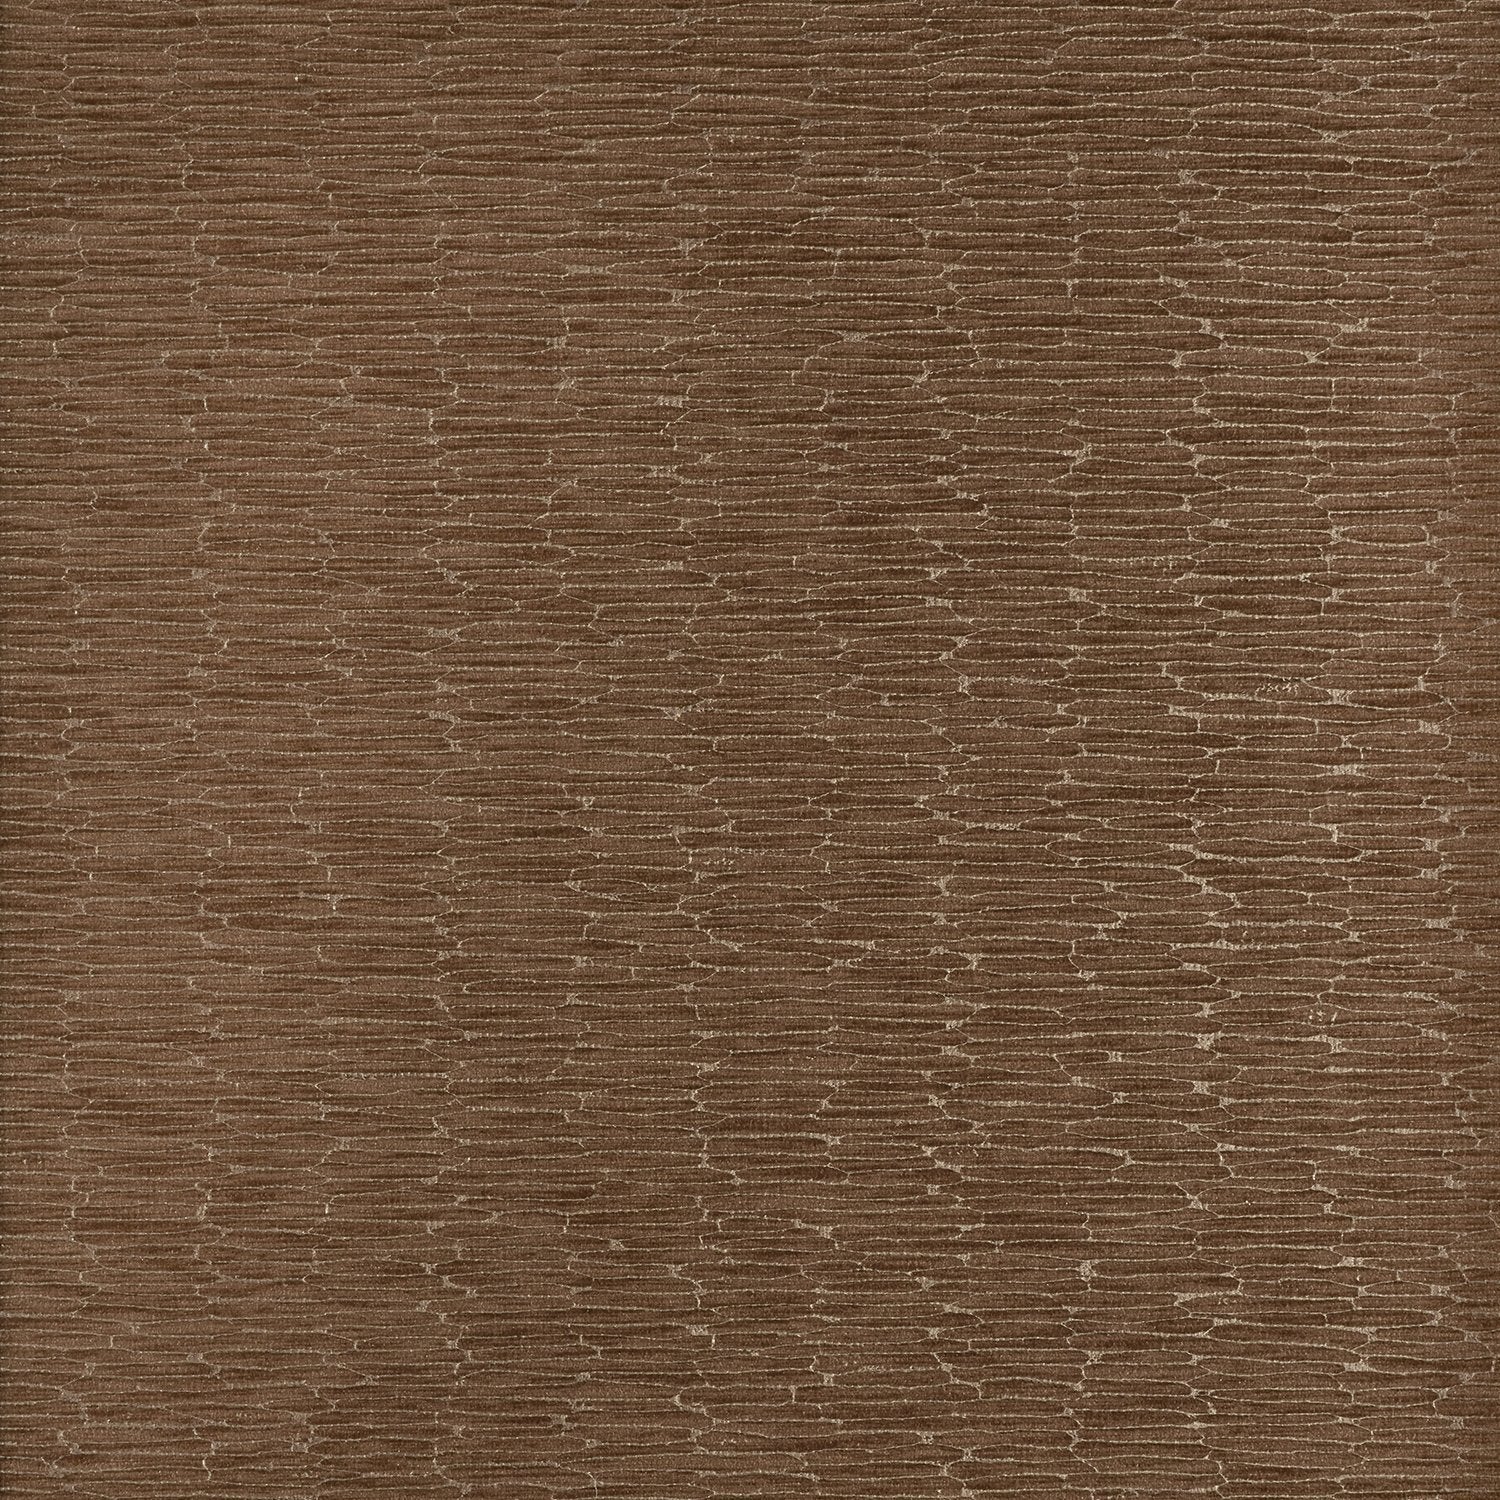 Chipper - Y46857 - Wallcovering - Vycon - Kube Contract